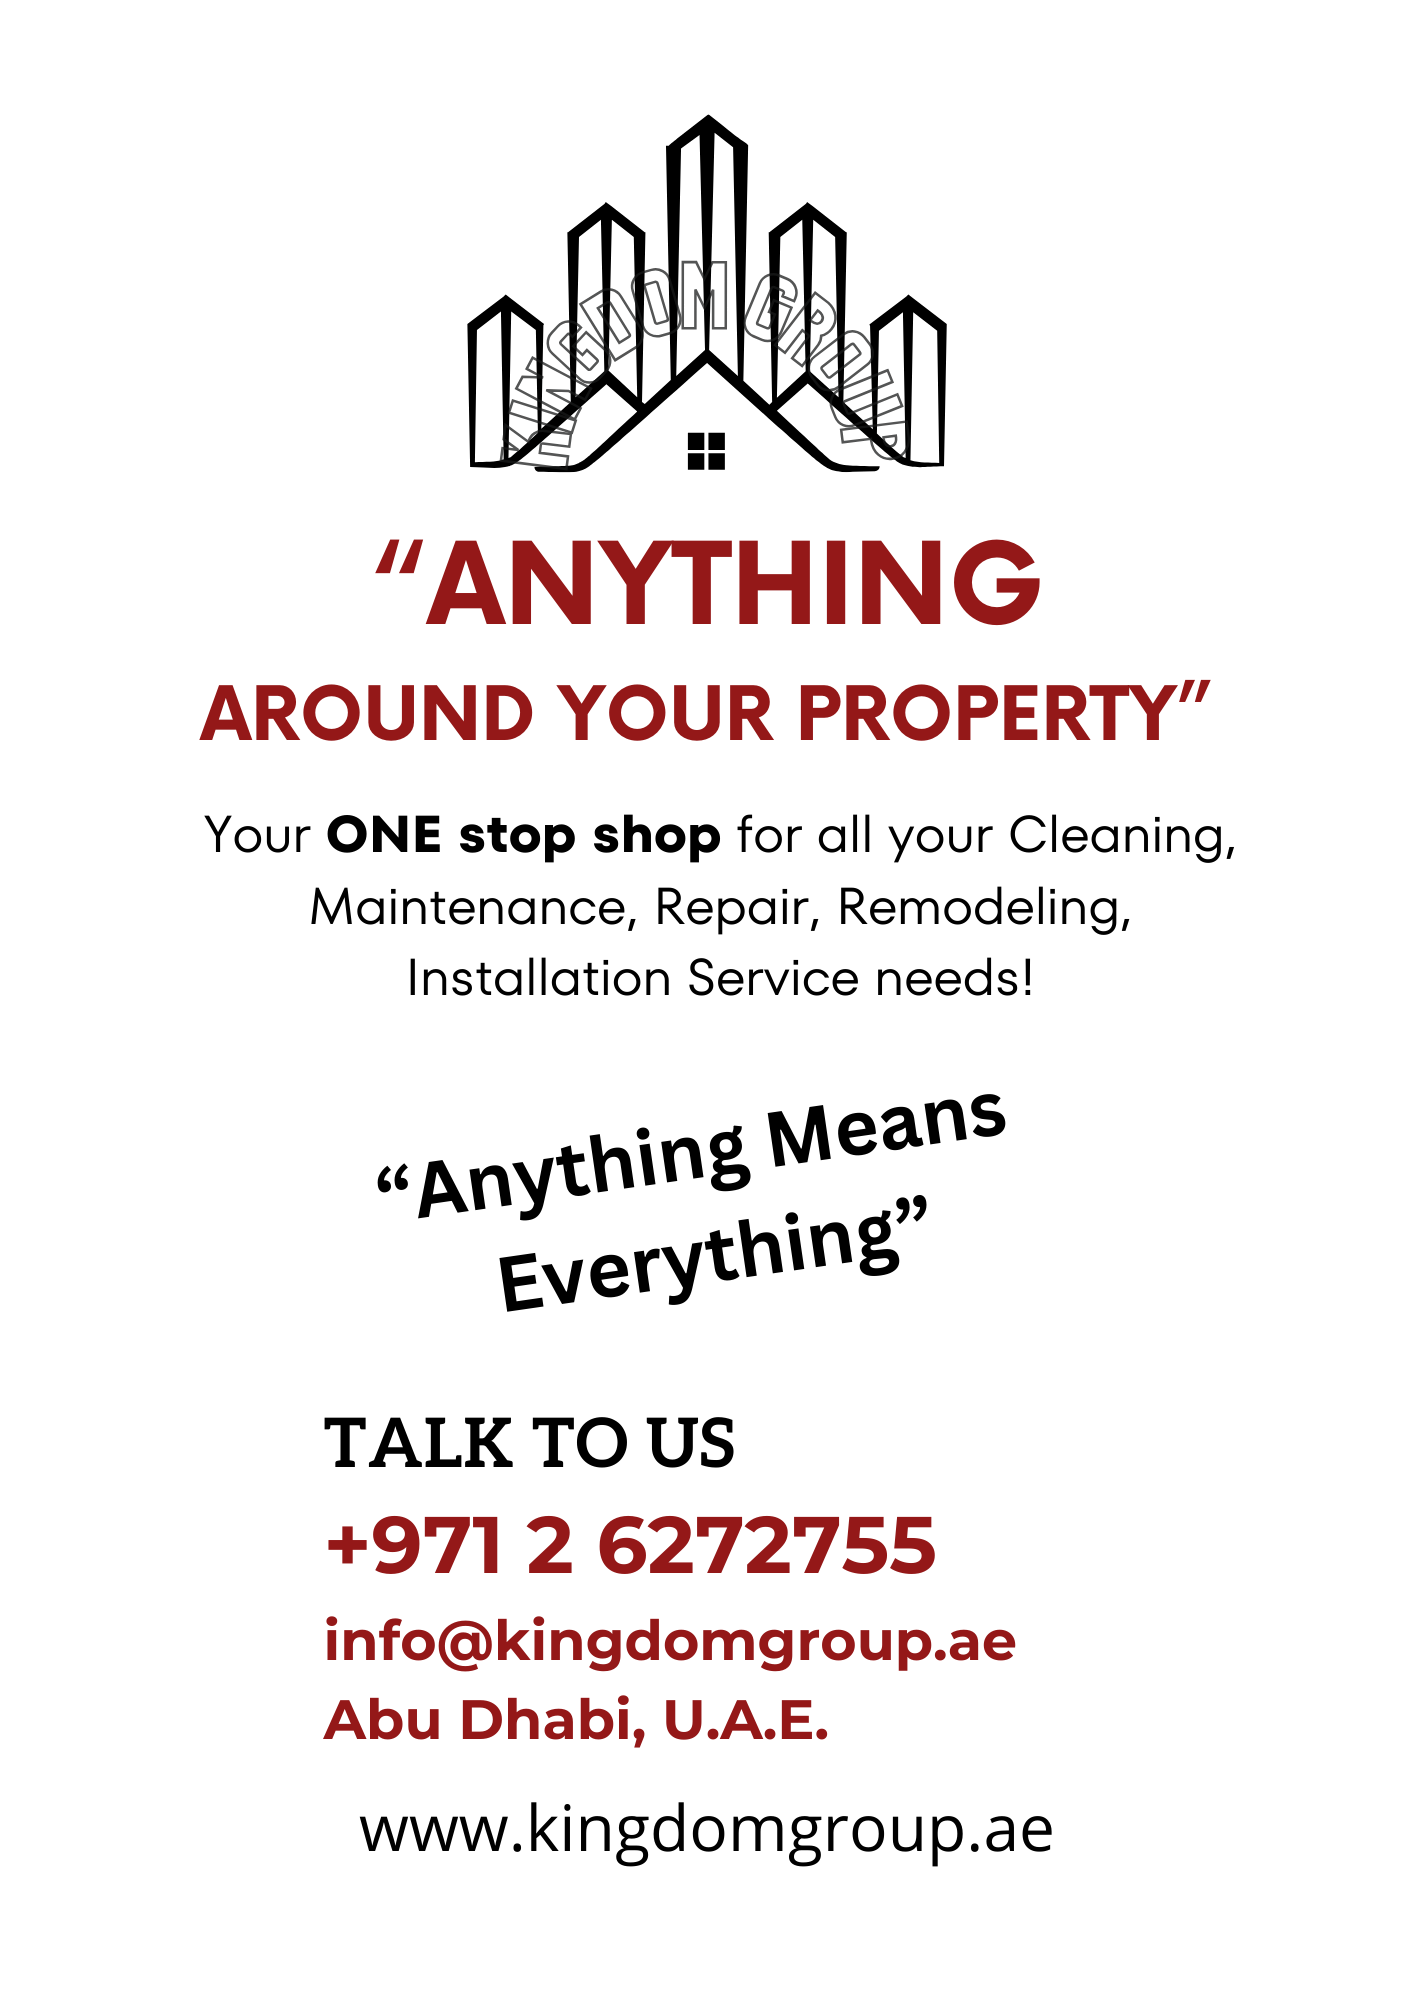 Home and Property Maintenance